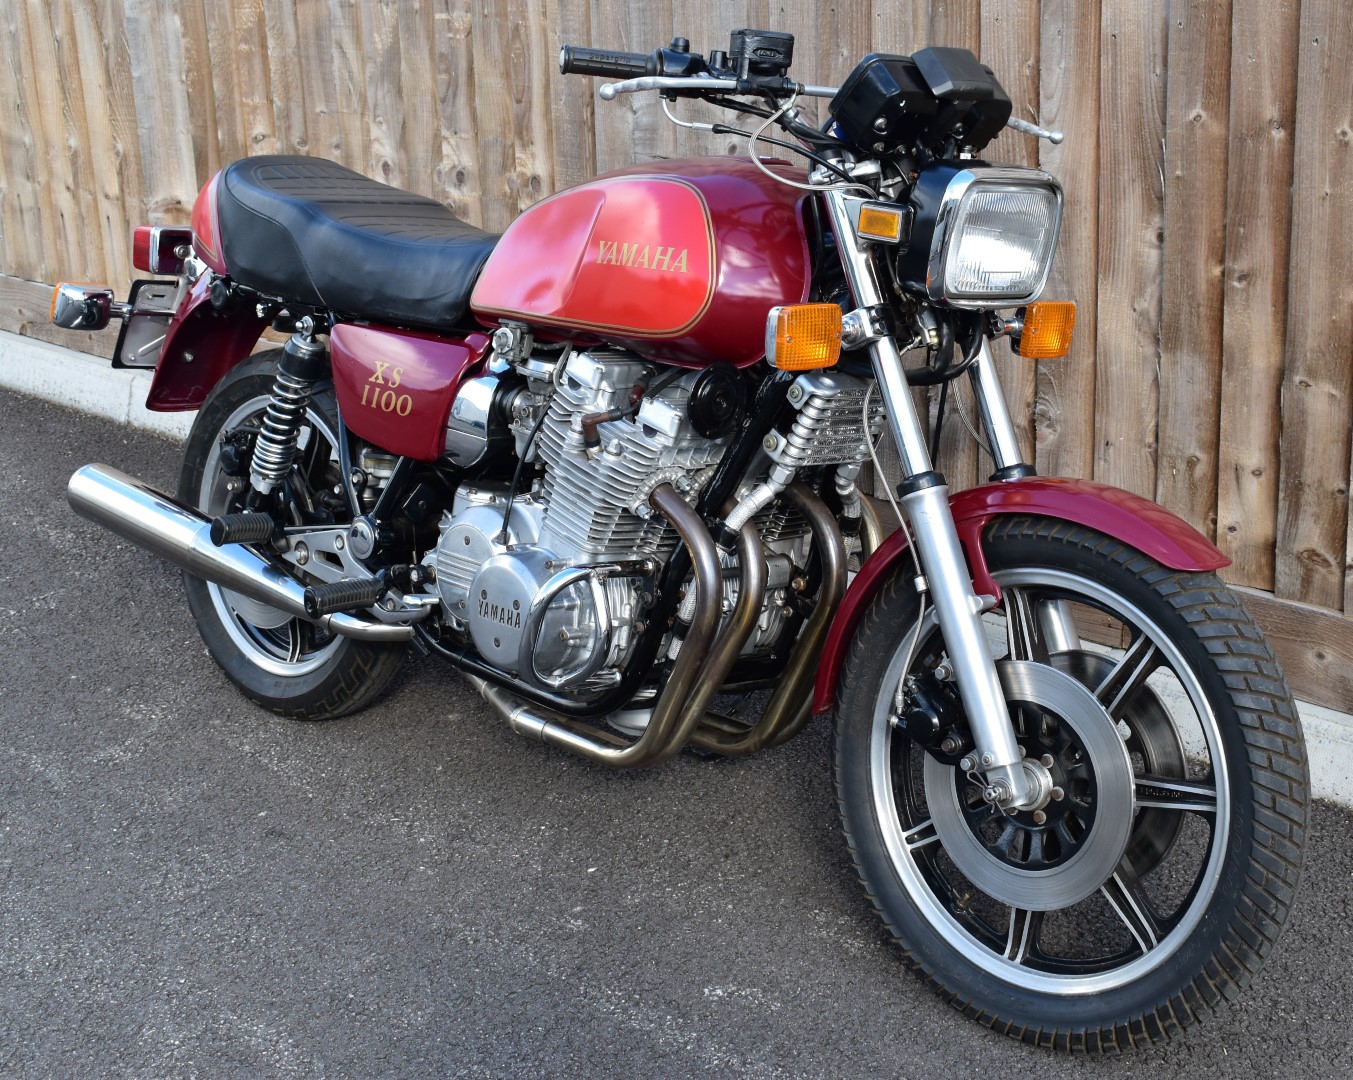 1980 Yamaha XS1100 motorbike registration NGS 439V, with V5c, used by the vendor for continental - Image 9 of 17